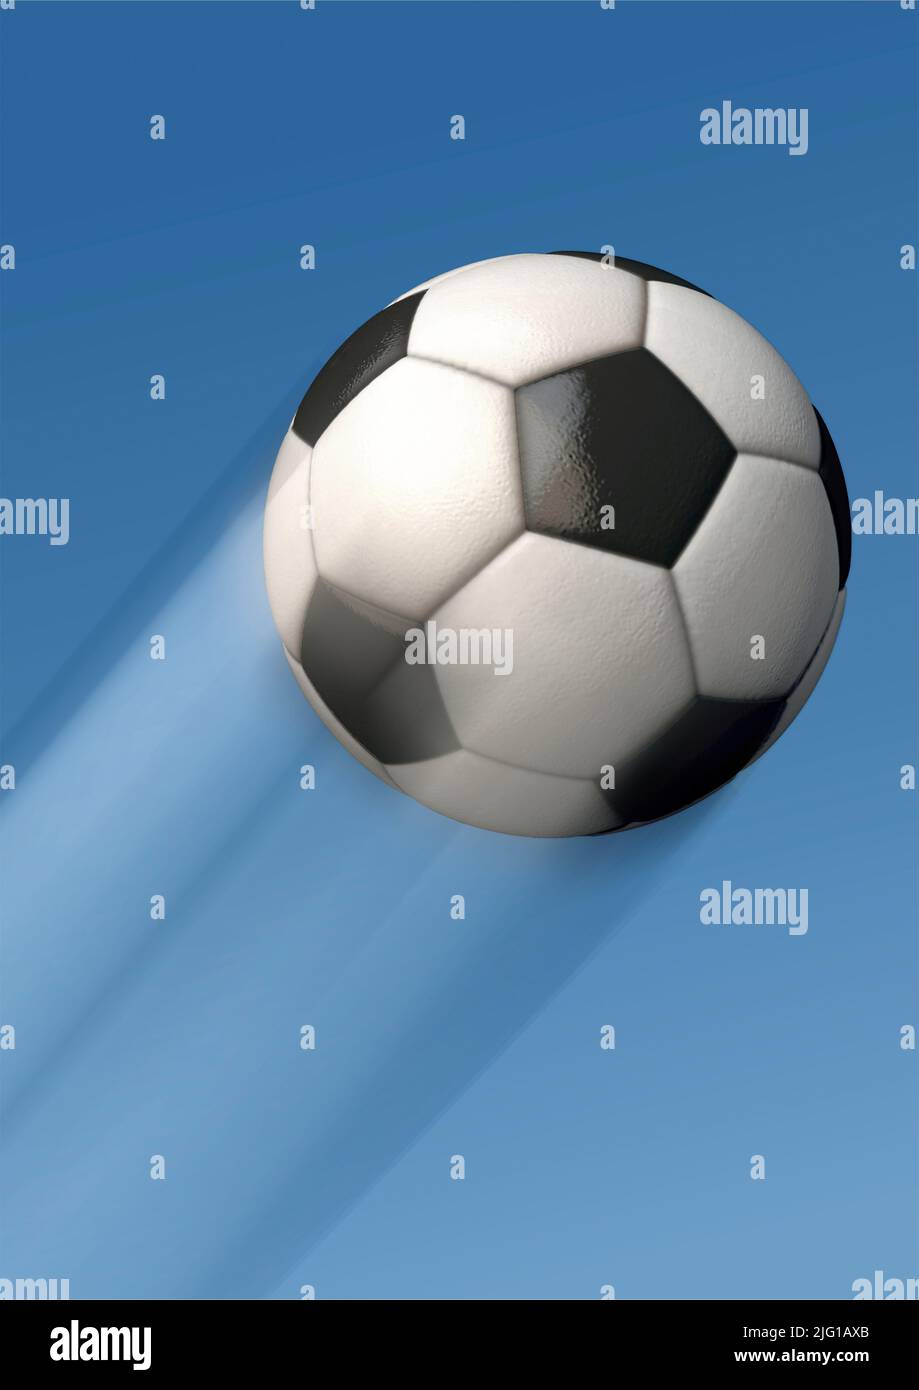 Football is flying in front of blue sky, Portrait format Stock Photo